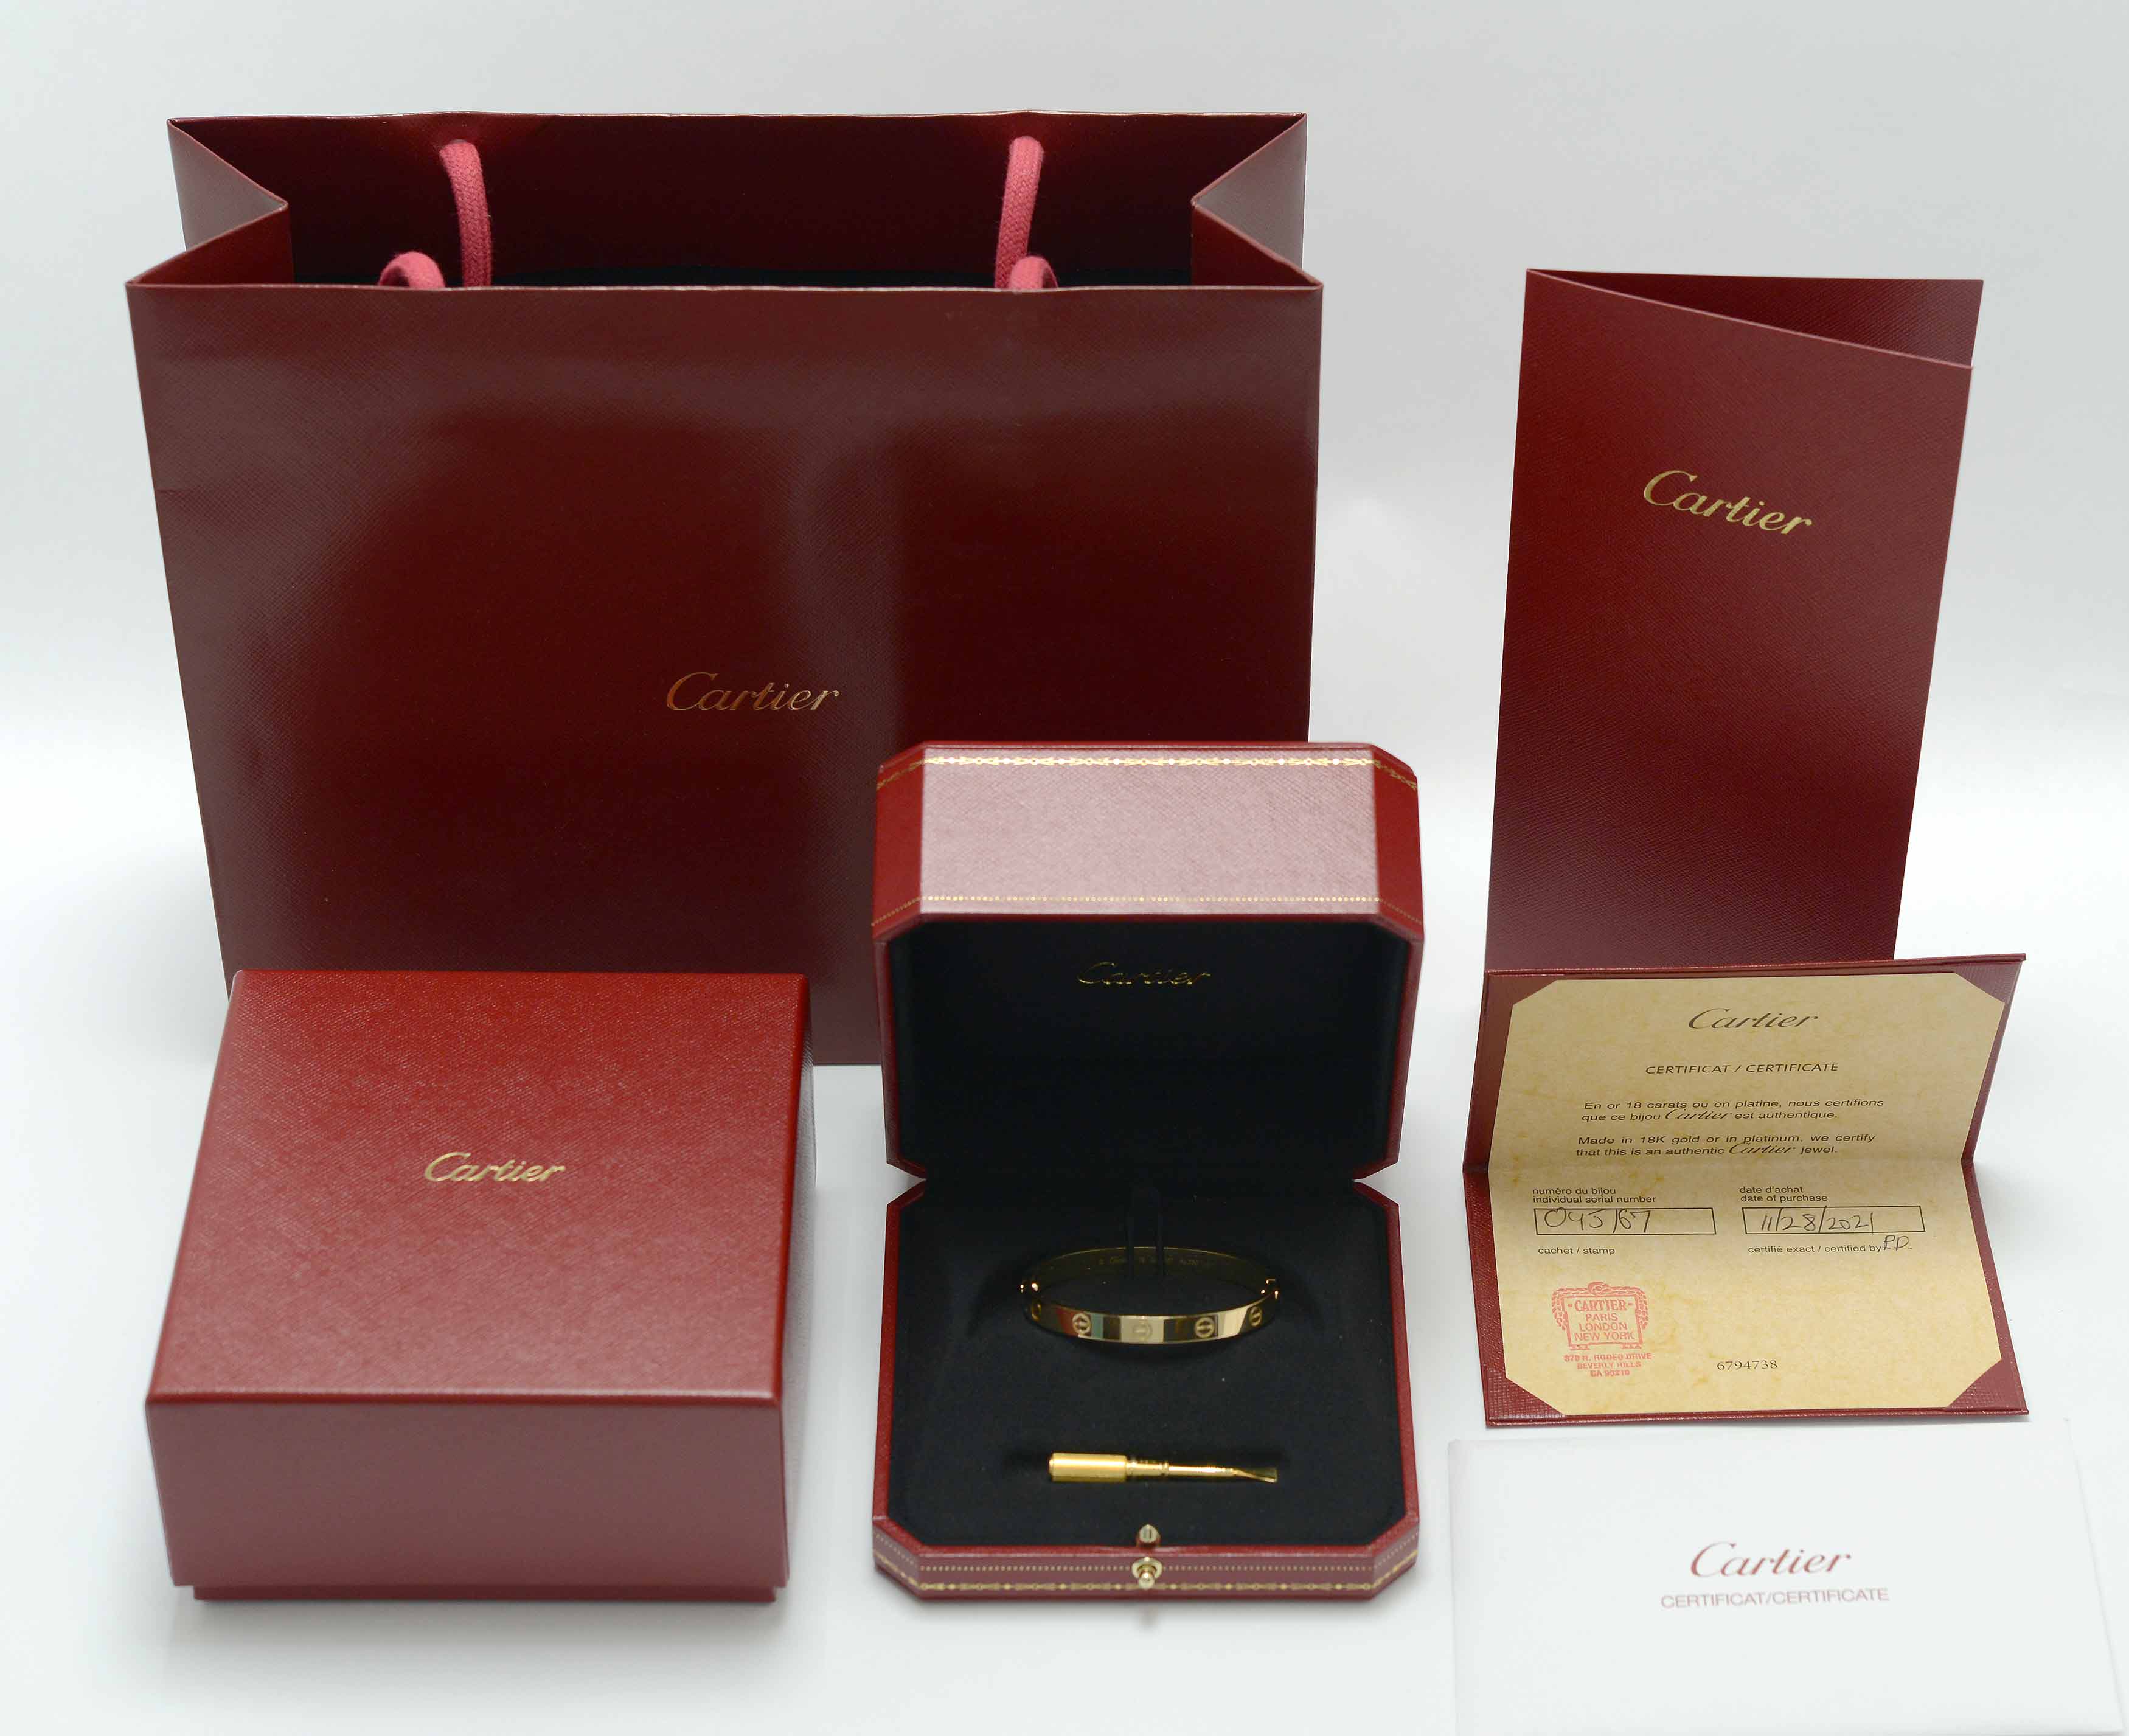 A new, authentic 18k gold Cartier love bracelet with certification.